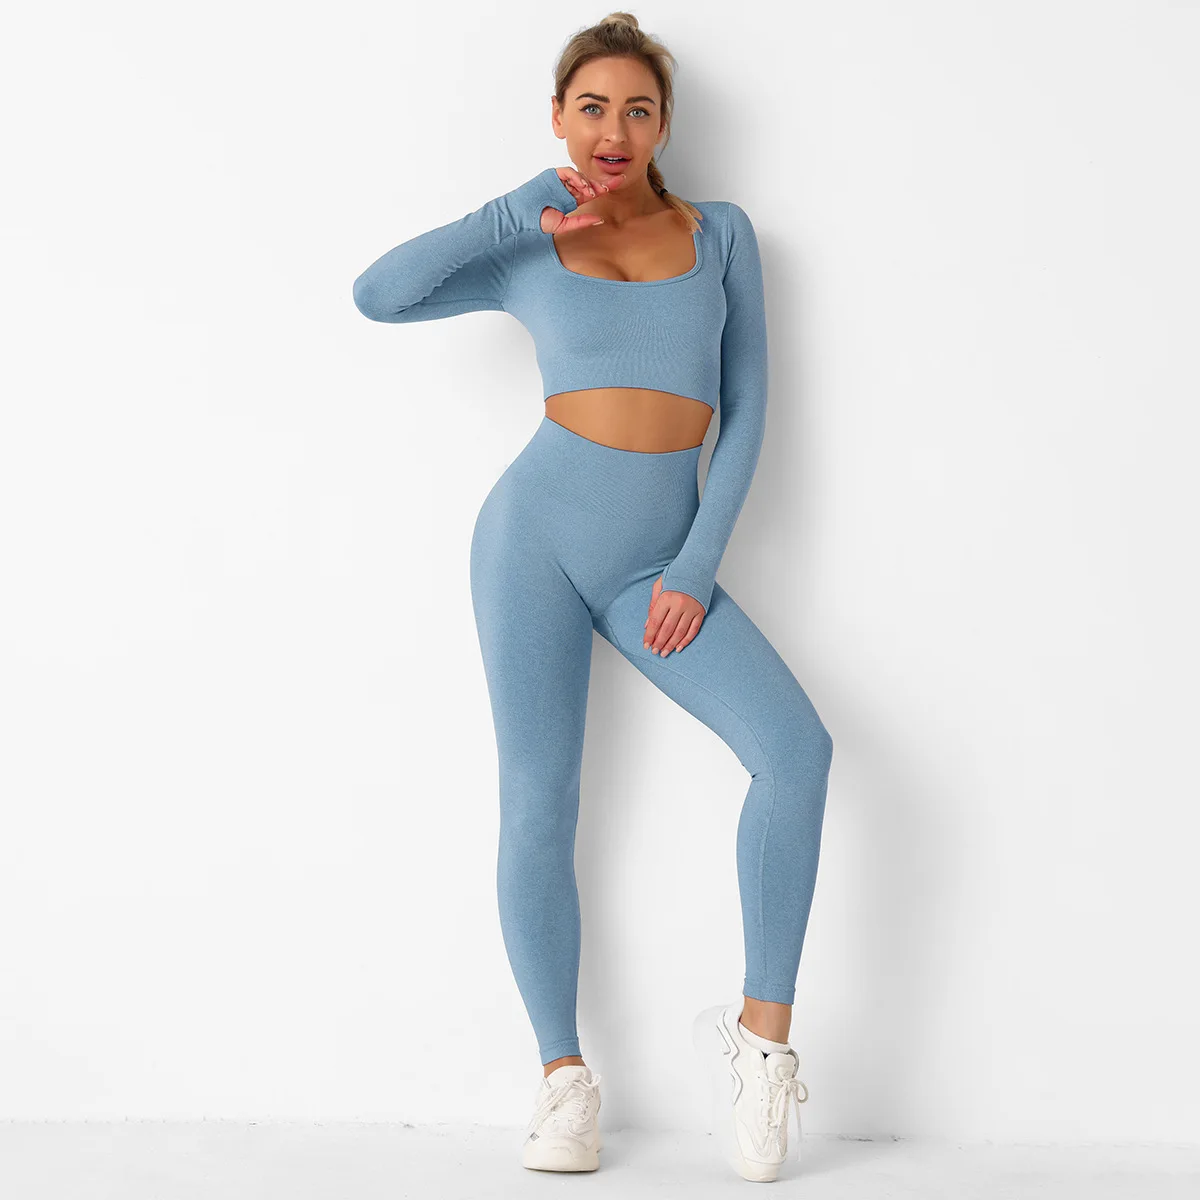 

Square Collar Sexy Casual Outfits Women Soild Colors Long Sleeve Shirts Pants Sets Seamless Push Up Slim Sporty Matching Sets